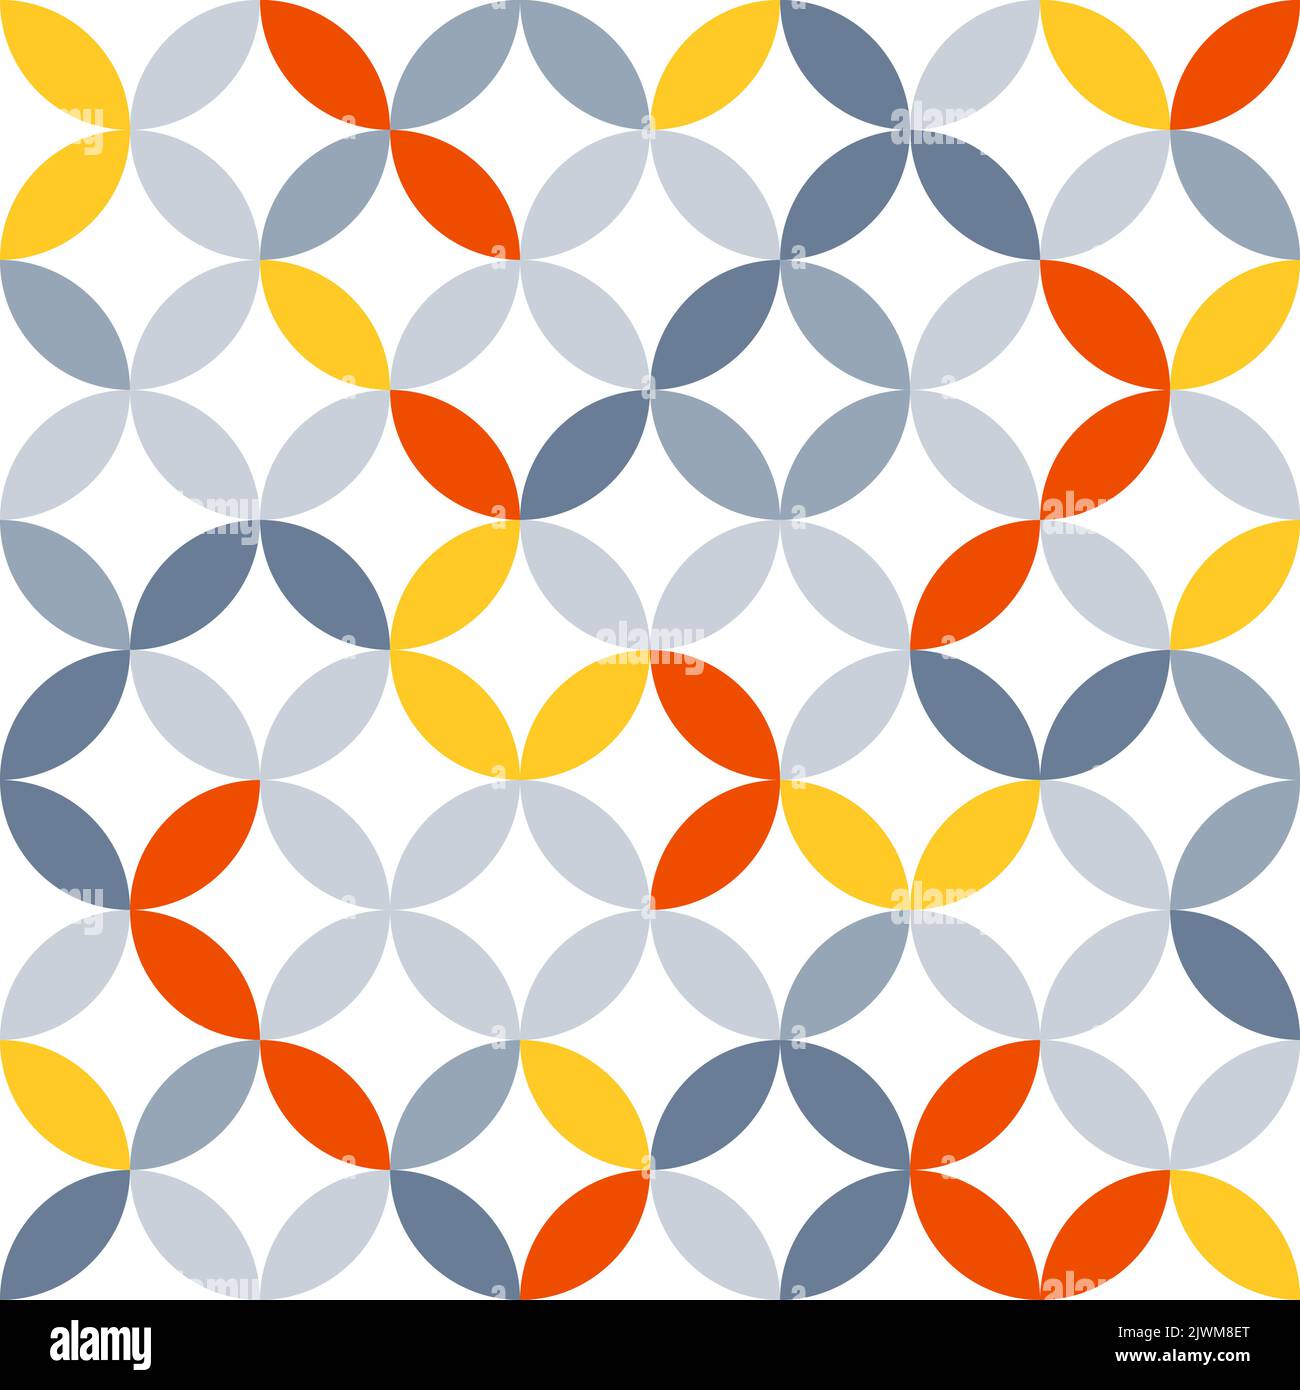 Overlapping circles seamless texture. Retro ovals and circles vector geometric fashion pattern. Colorful fashion print. Stock Vector